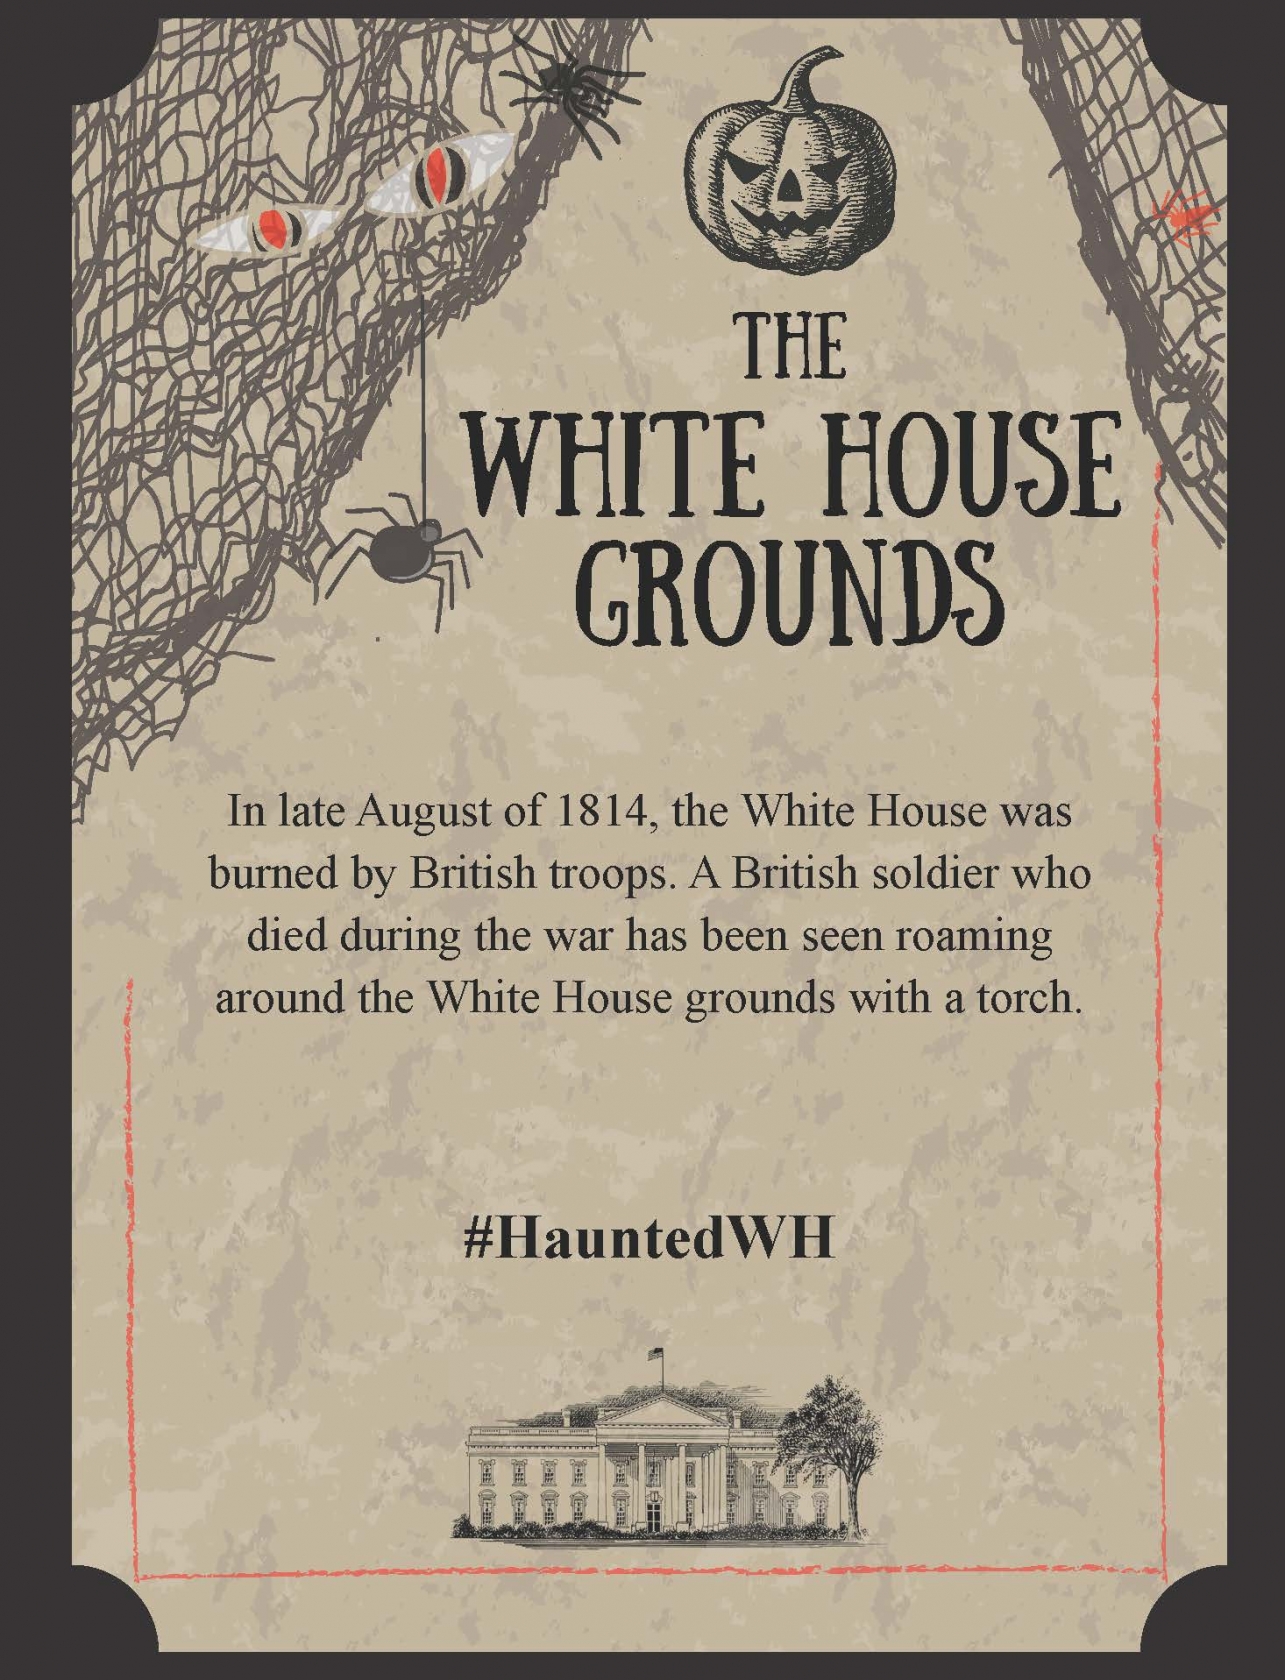 In late August of 1814, the White House was burned by British troops. A British soldier who died during the war has been seen roaming around the White House grounds with a torch.